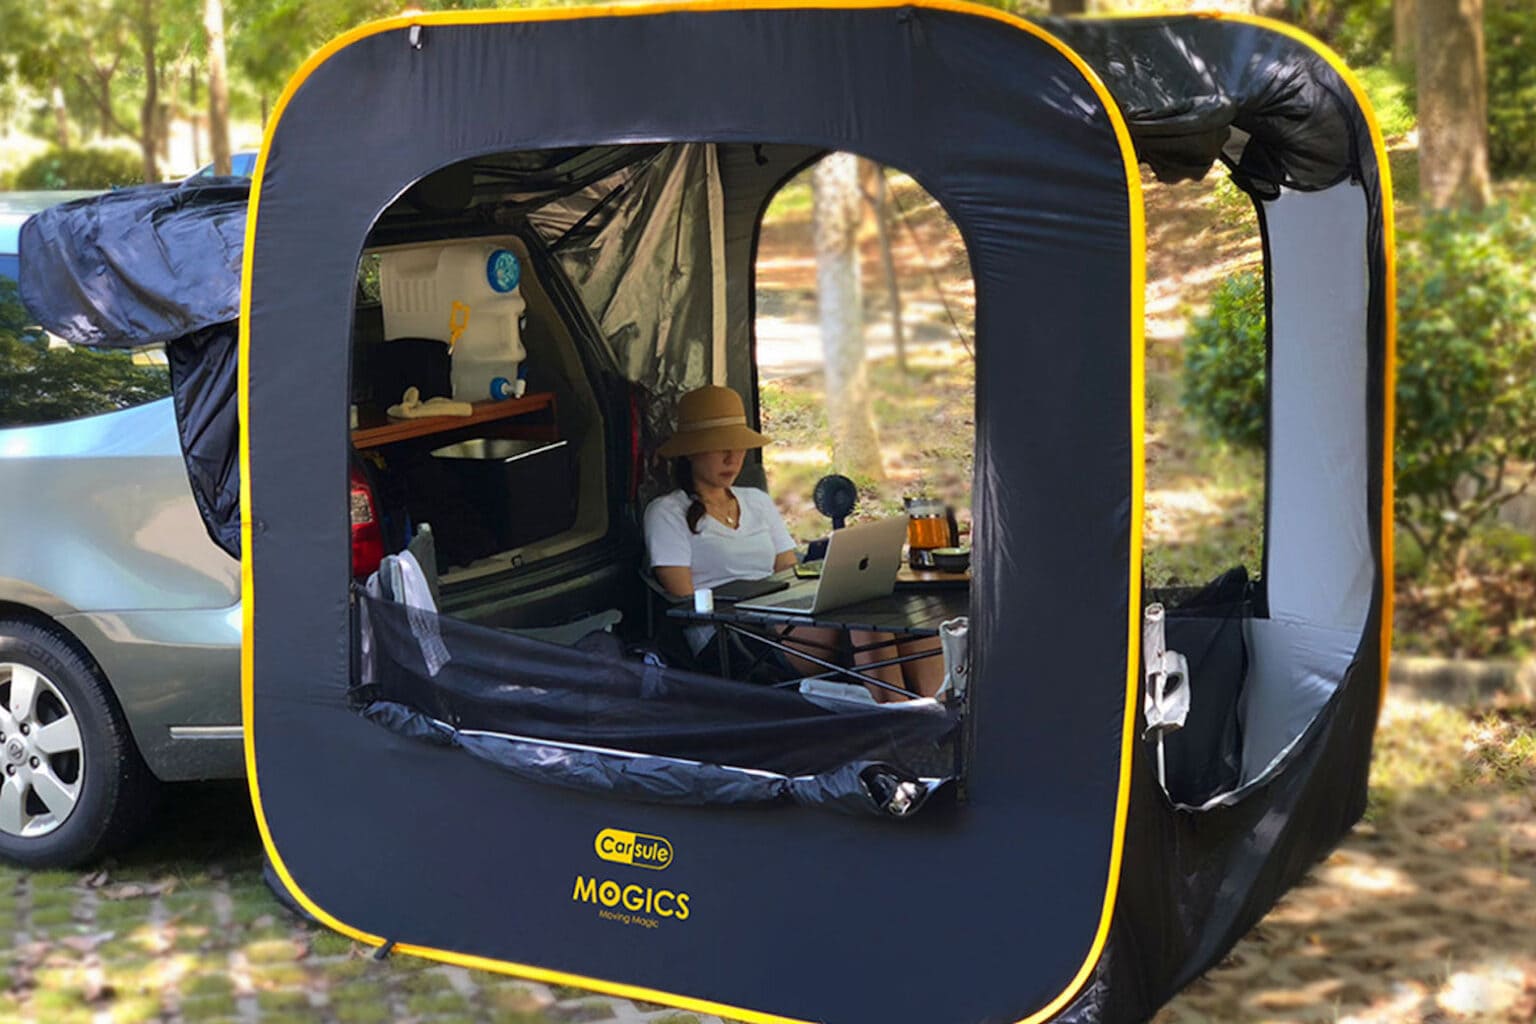 Take $10 off this portable car cabin for Memorial Day.